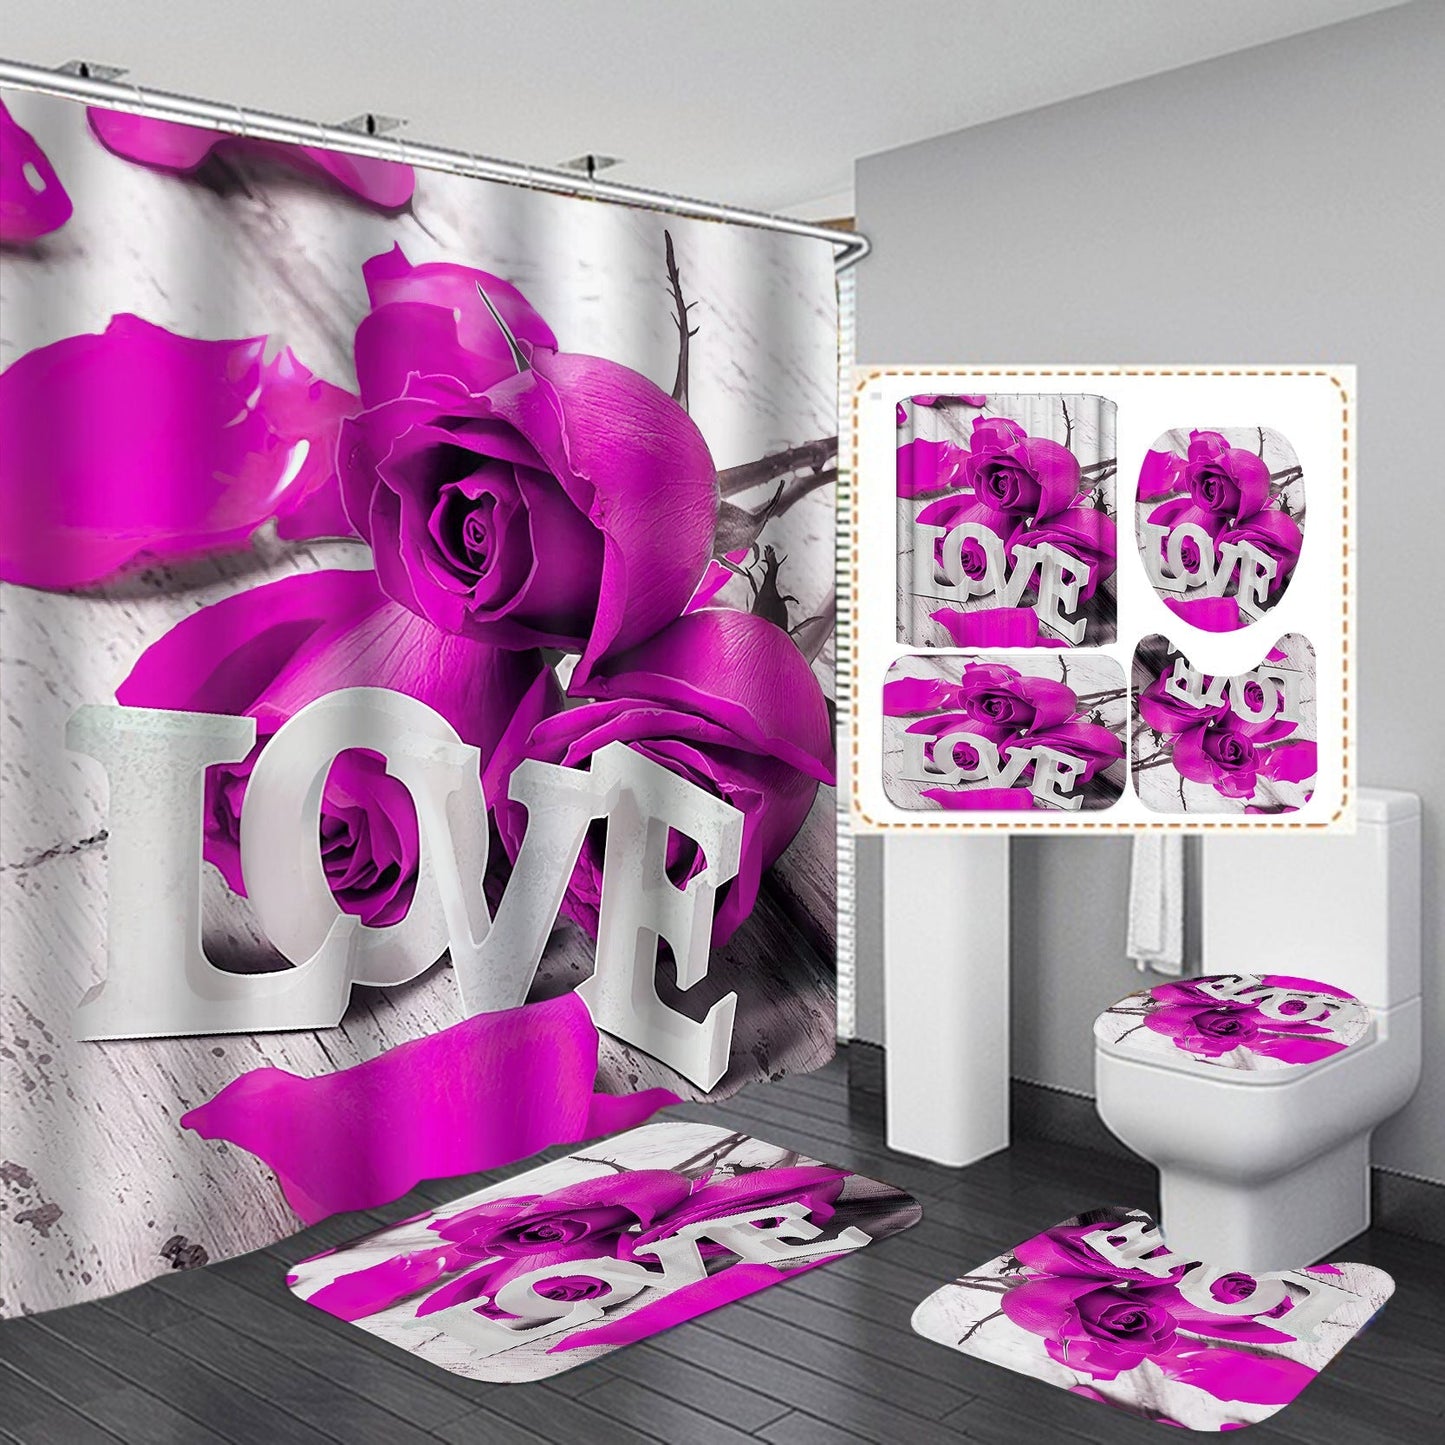 "Love" 3D Rose Design Shower Curtain Bathroom SetsNon-Slip Toilet Lid Cover-Shower Curtain-180×180cm Shower Curtain Only-3-Free Shipping at meselling99